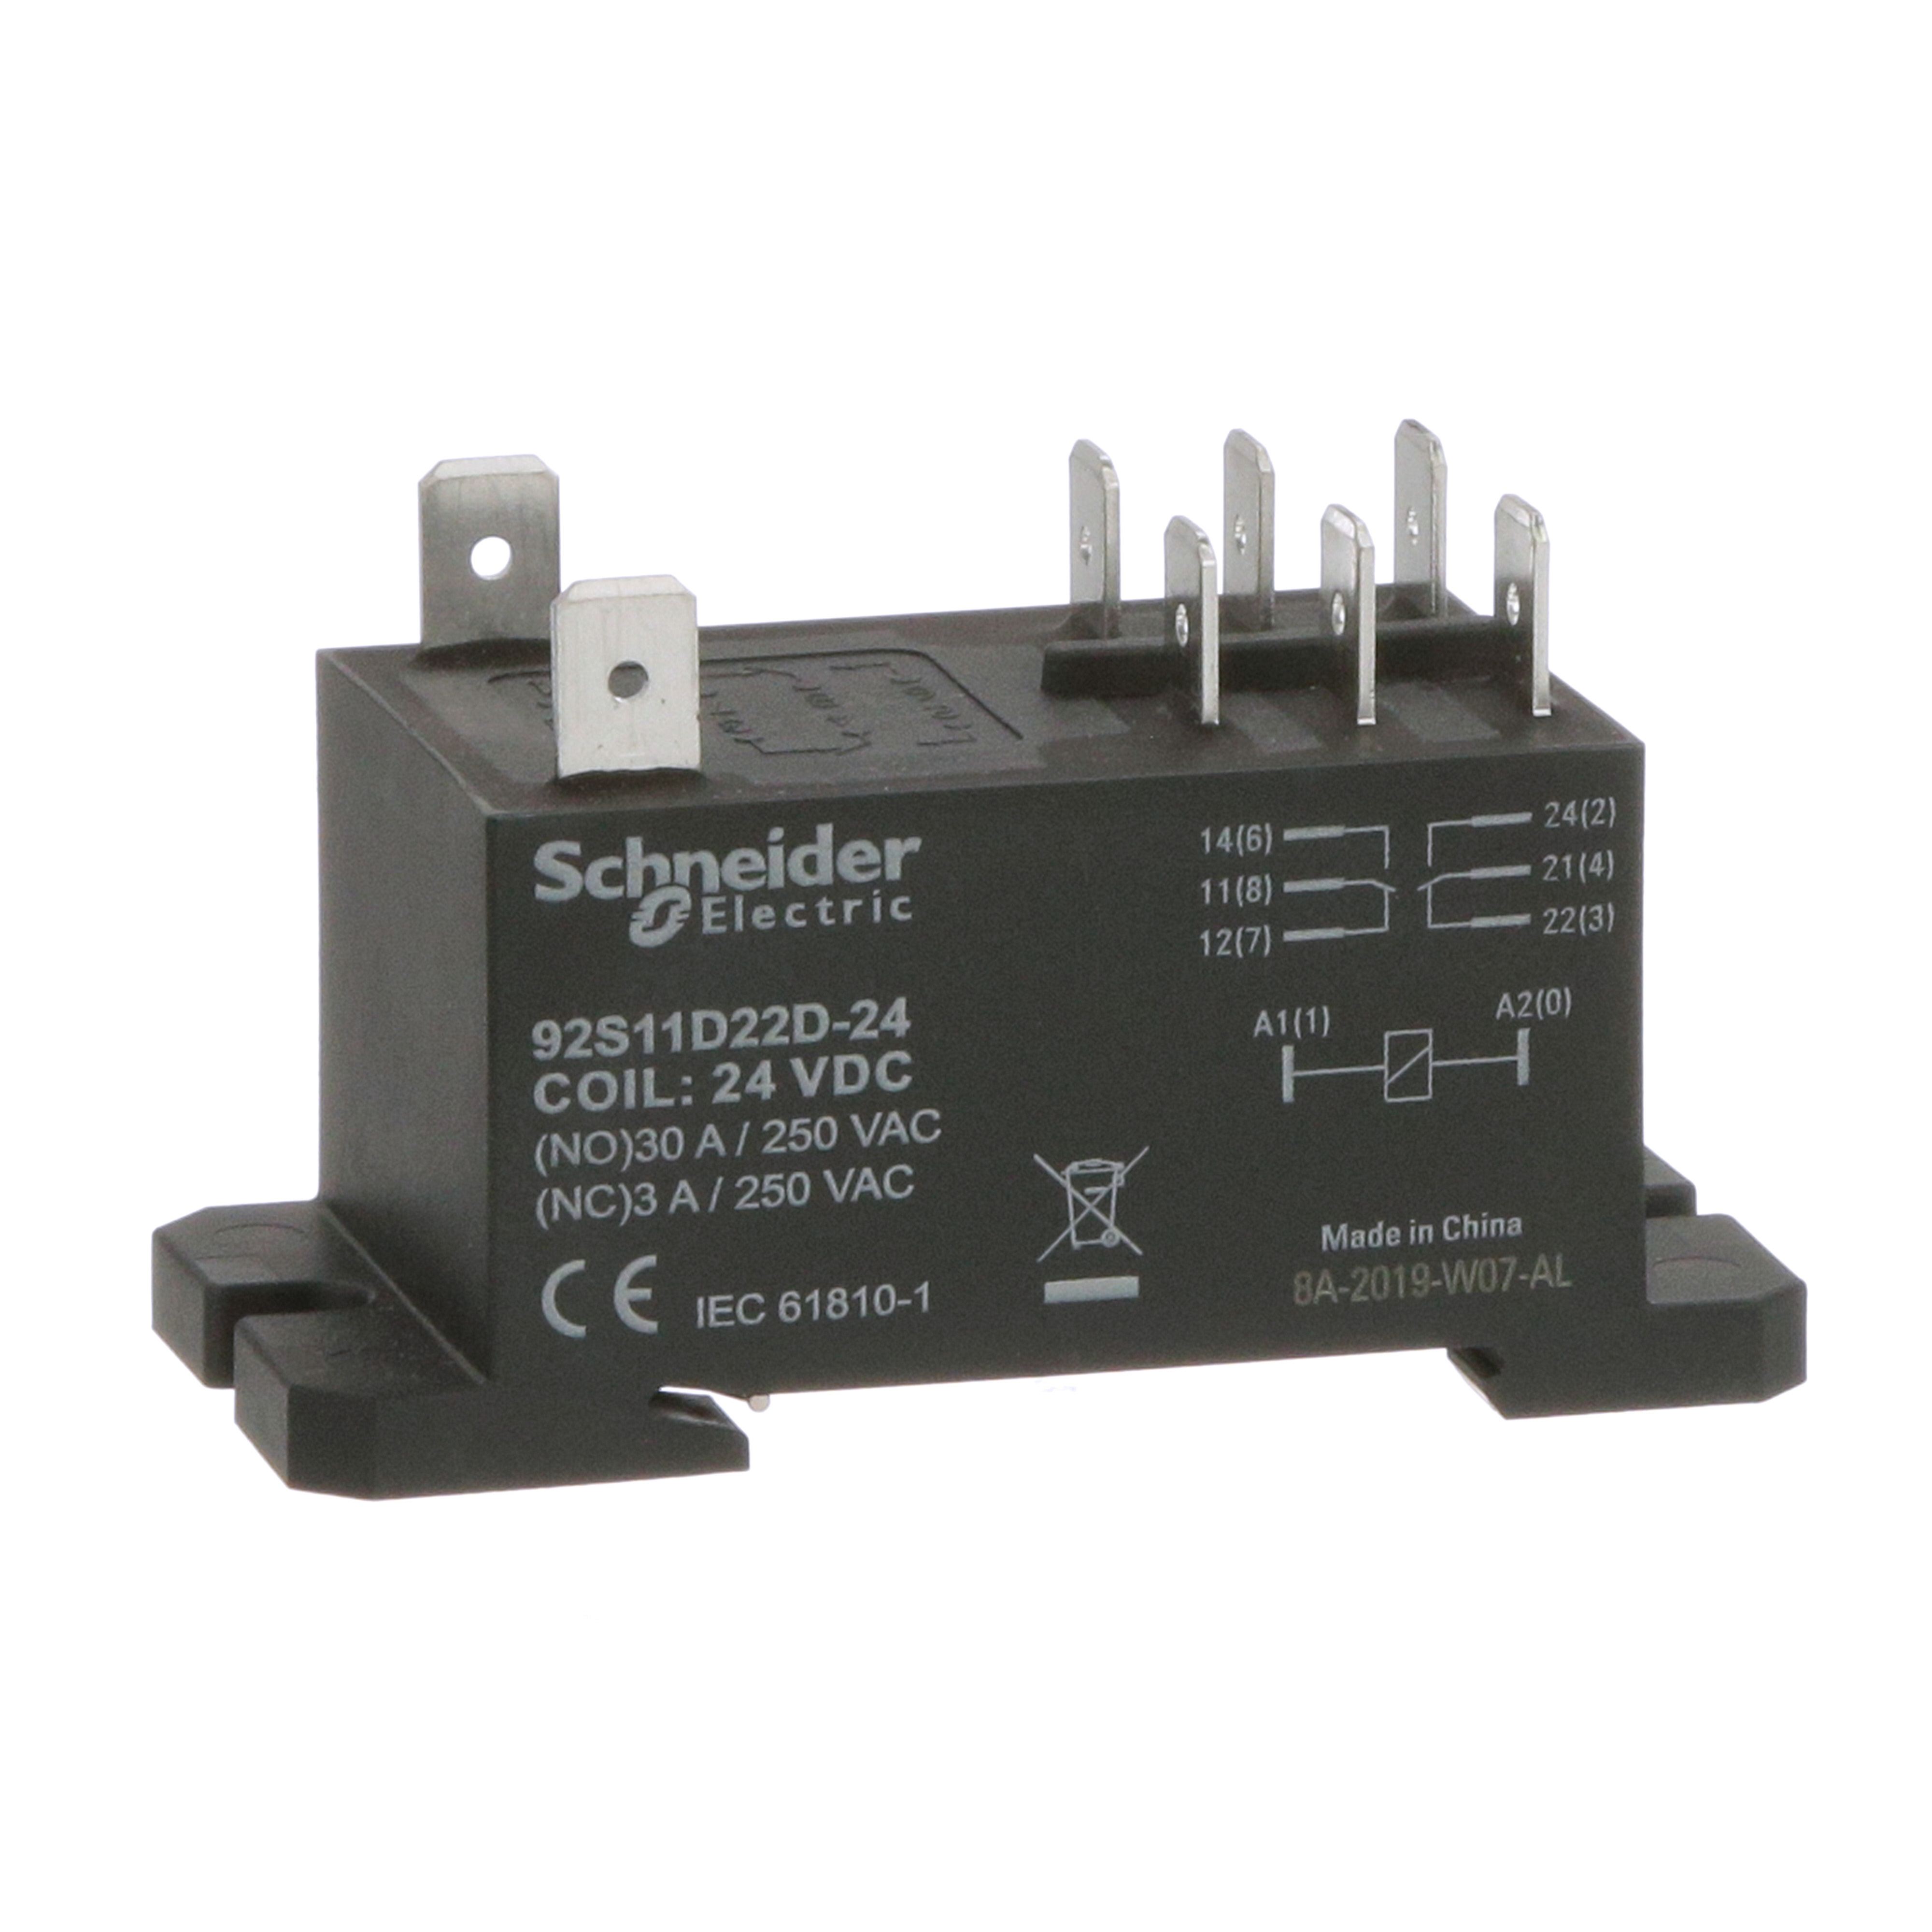 Power Relay, DPDT, class F coil insulation, DIN rail and panel mount cover, 30A, 24V DC, 2 C/O